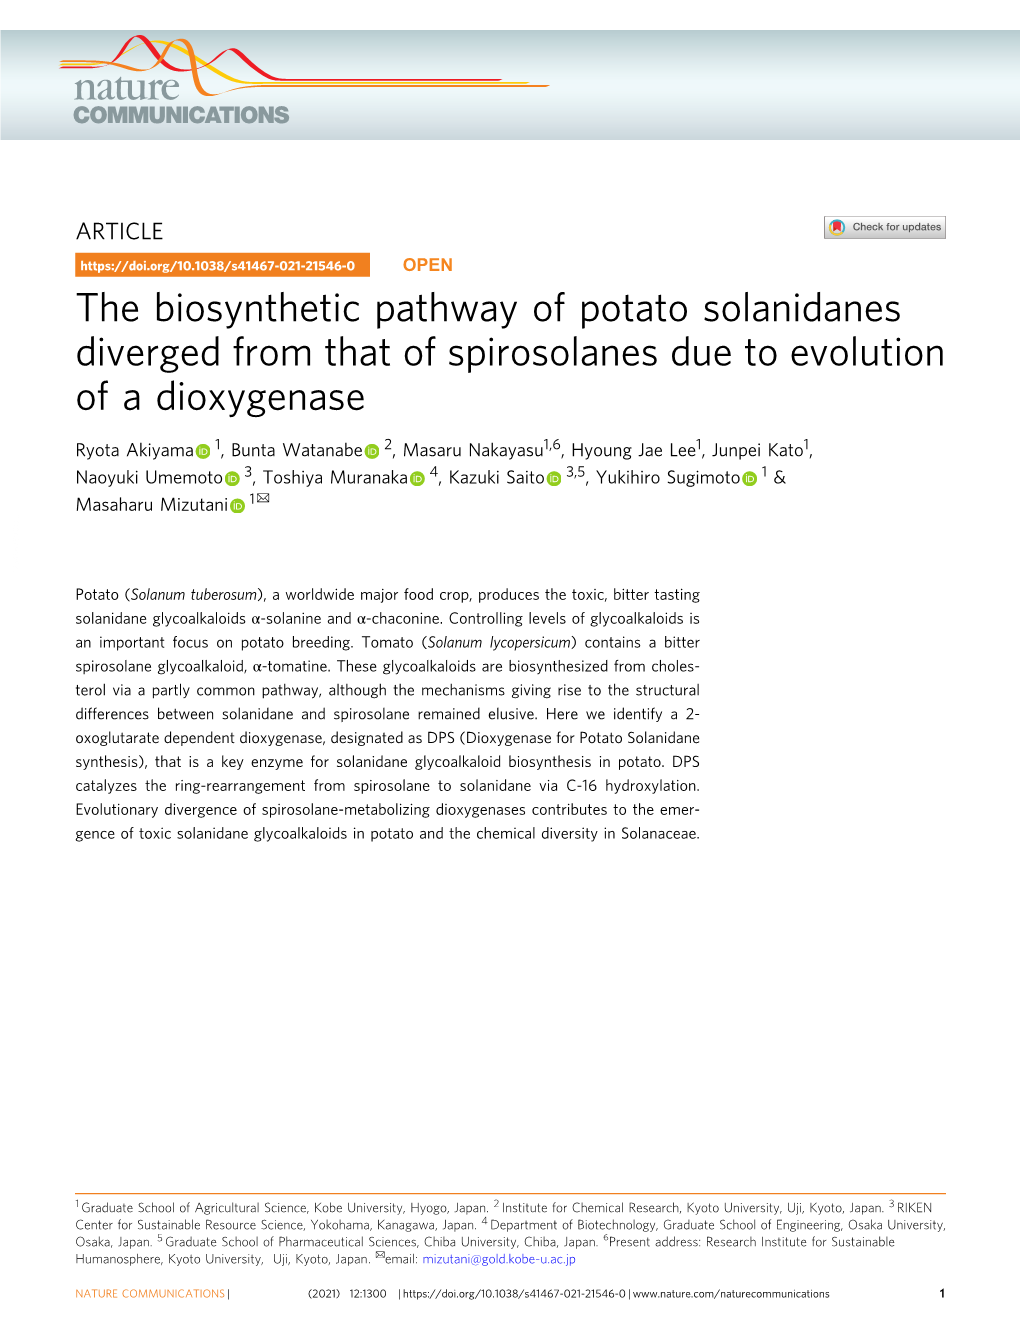 The Biosynthetic Pathway of Potato Solanidanes Diverged from That of Spirosolanes Due to Evolution of a Dioxygenase